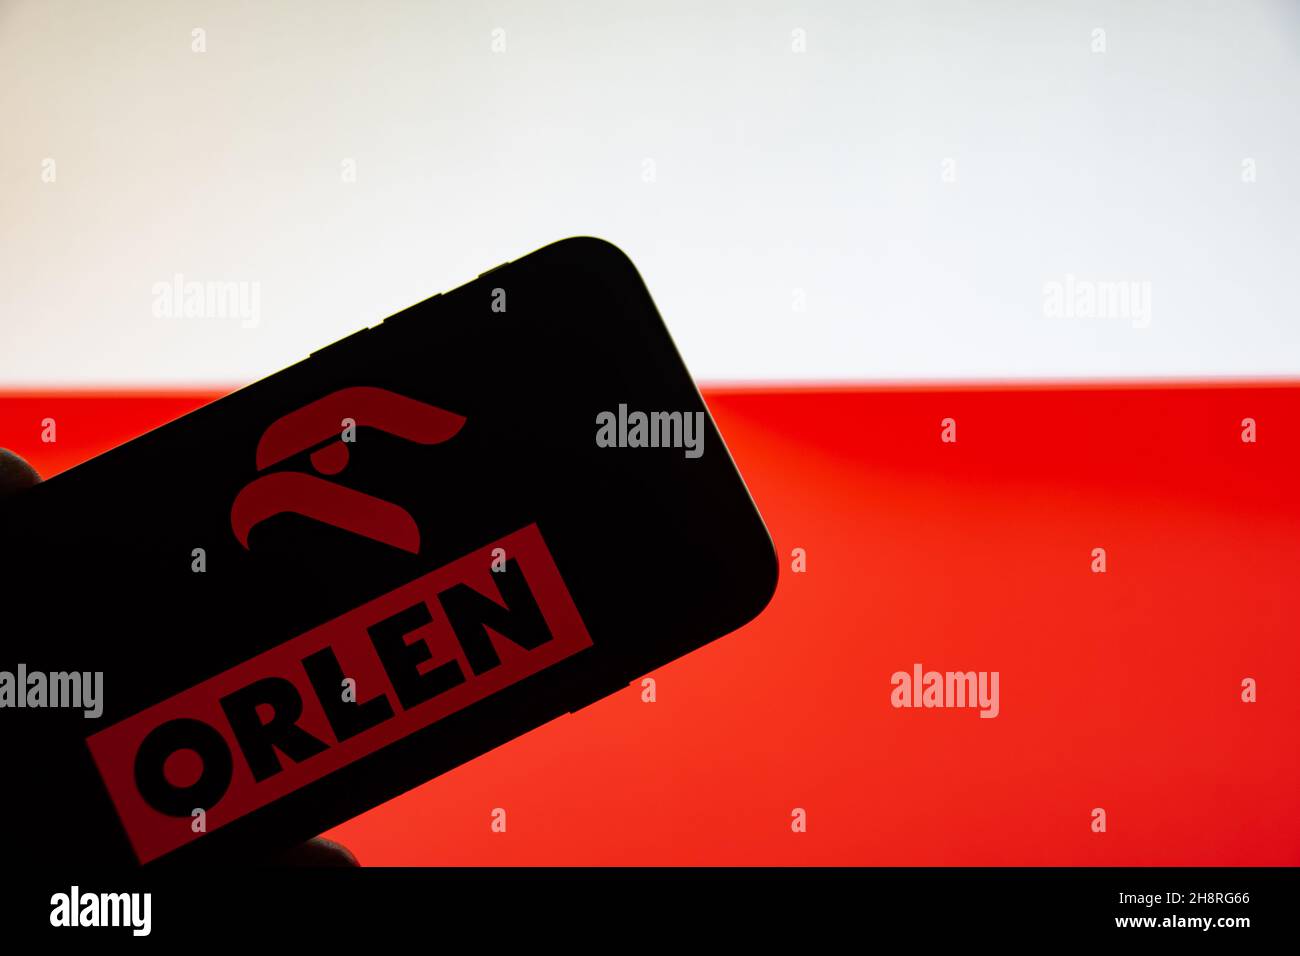 Rheinbach, Germany  2 December 2021,  The brand logo of the petrol station operator 'Orlen' on the display of a smartphone (focus on the brand logo) Stock Photo